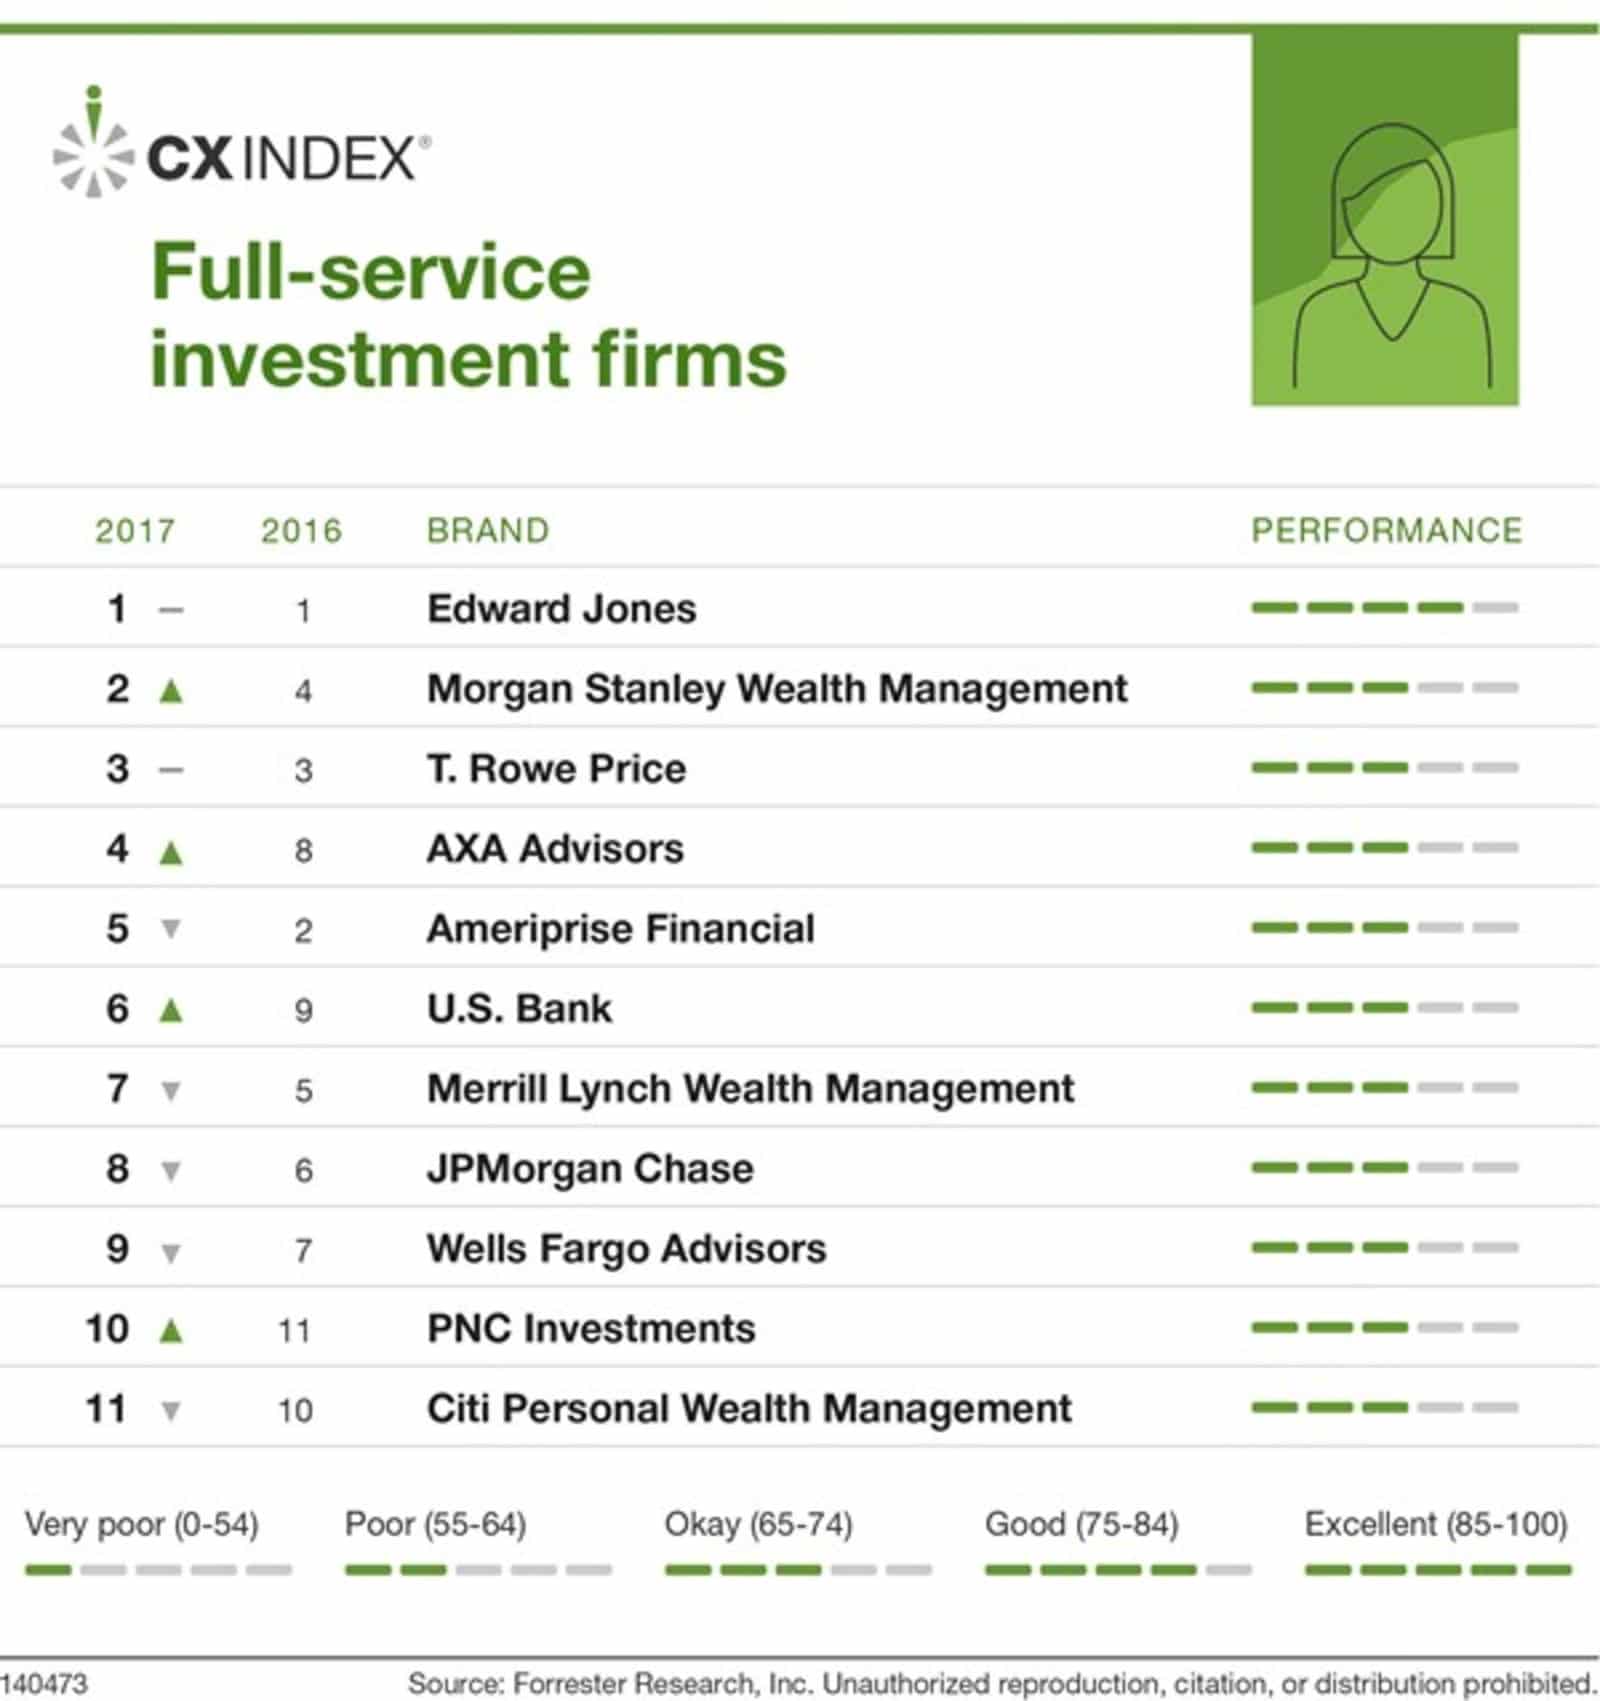 Forrester CX Index ranks 23 investment firm brands on performance